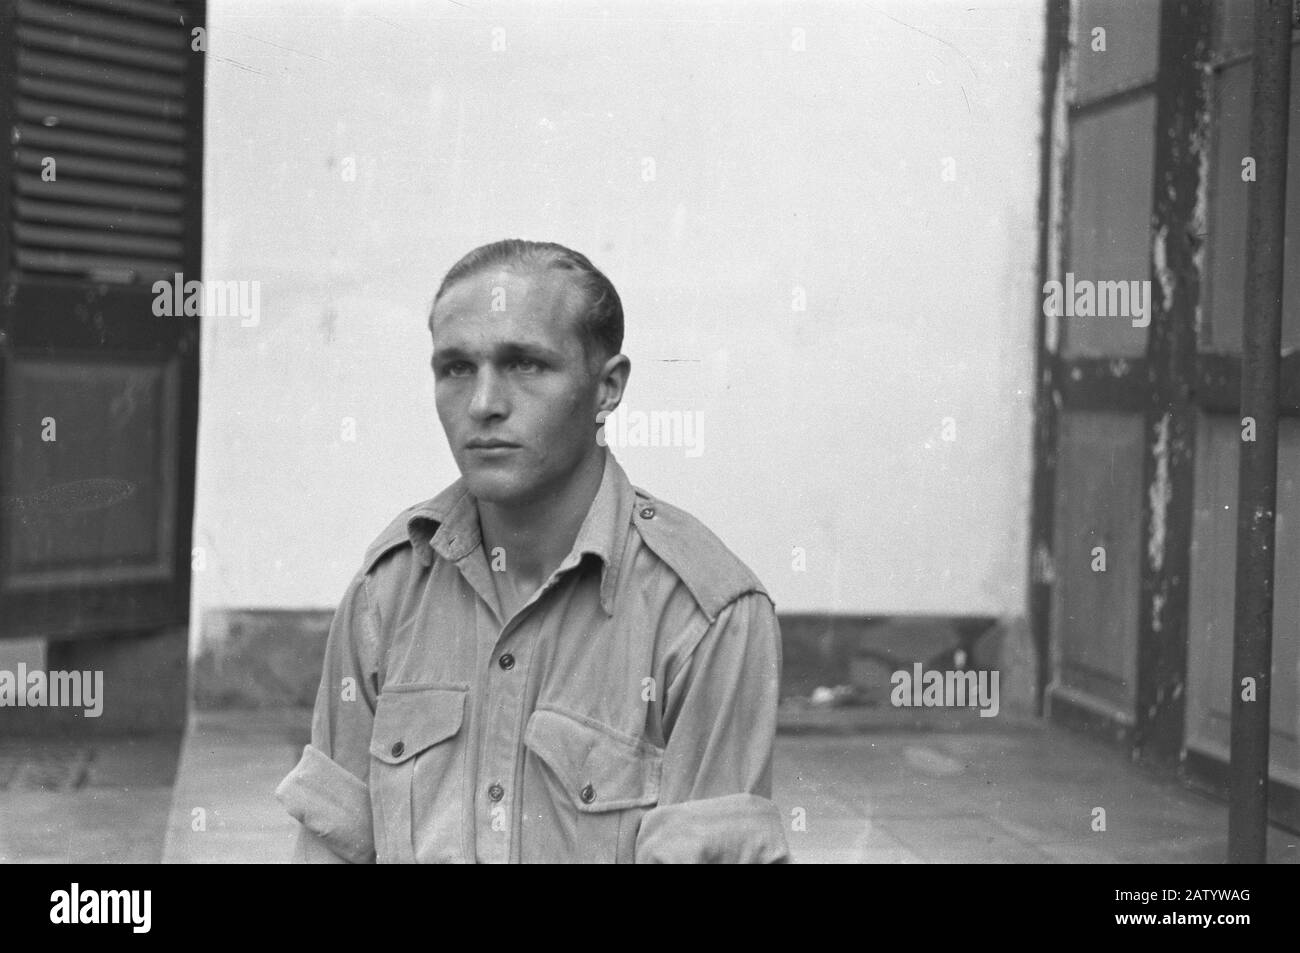 Passport IV  [Miltair without rank insignia] Date: 1947 Location: Indonesia Dutch East Indies Stock Photo